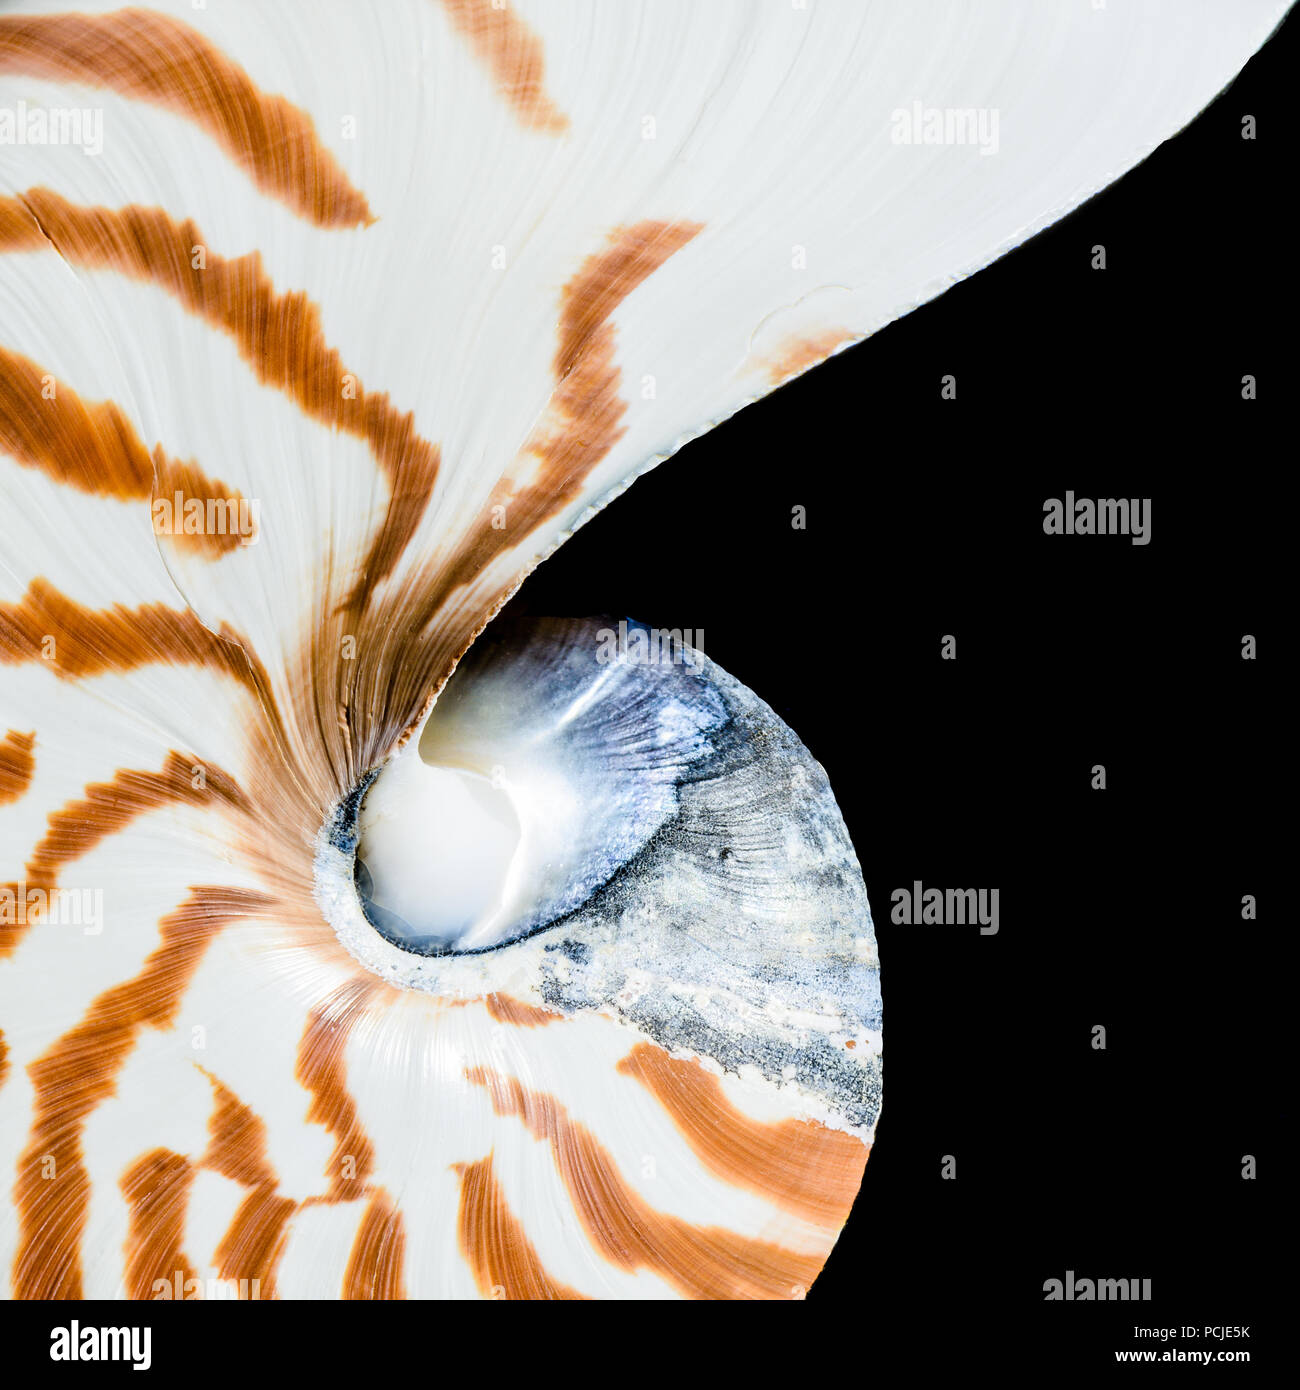 Close up of a patterned and textured nautilus shell showing strong curves spiralling into the centre of the image against a black background Stock Photo